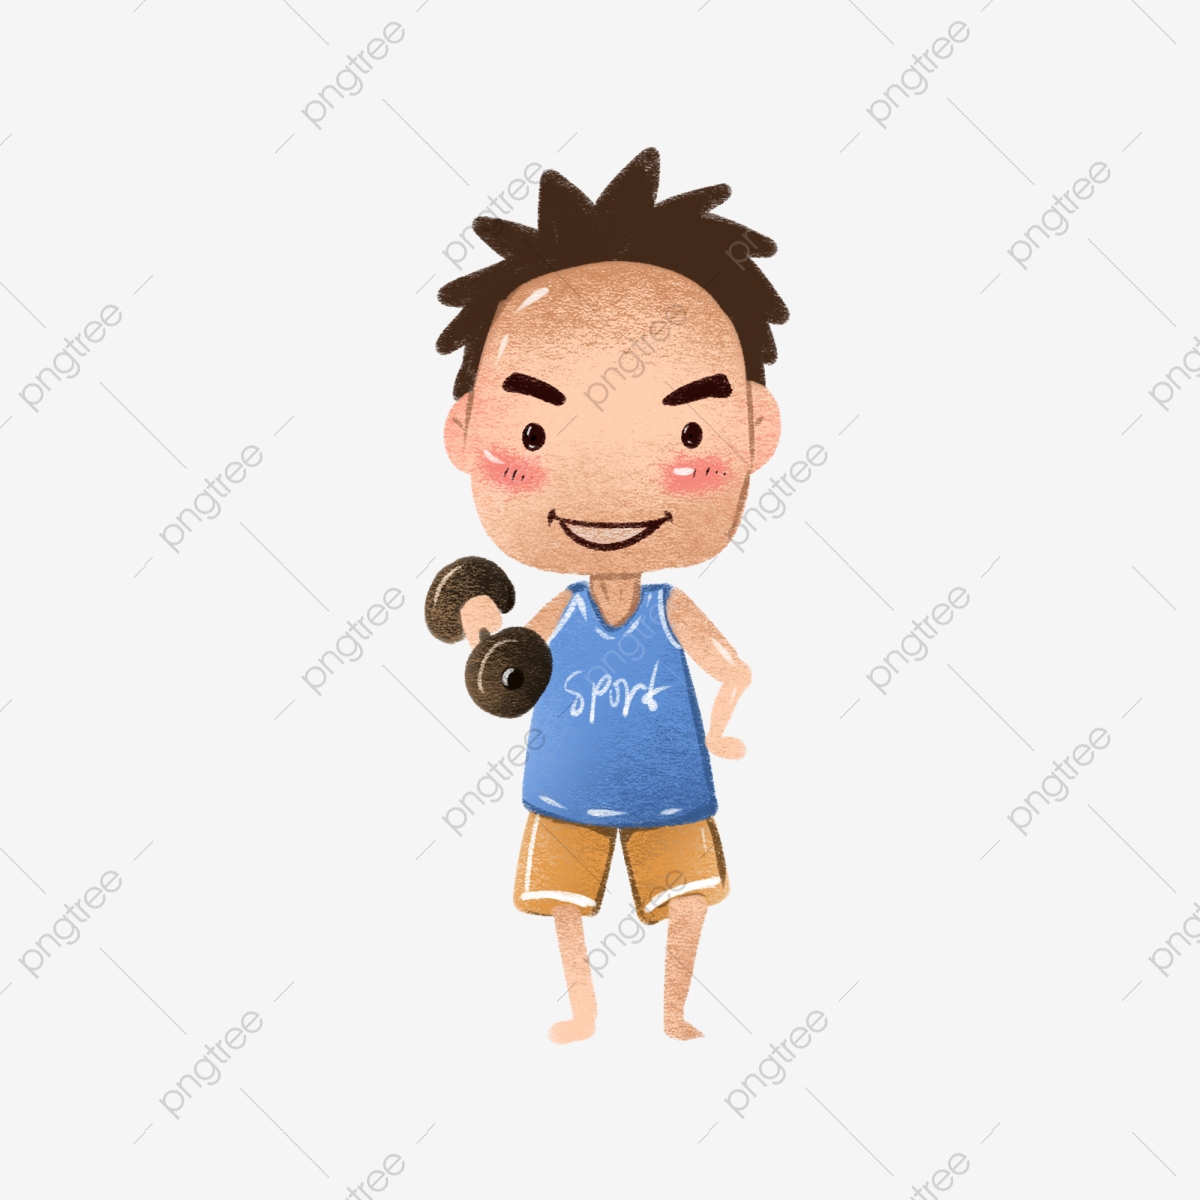 Muscles clipart muscle movement. Muscular fitness png 